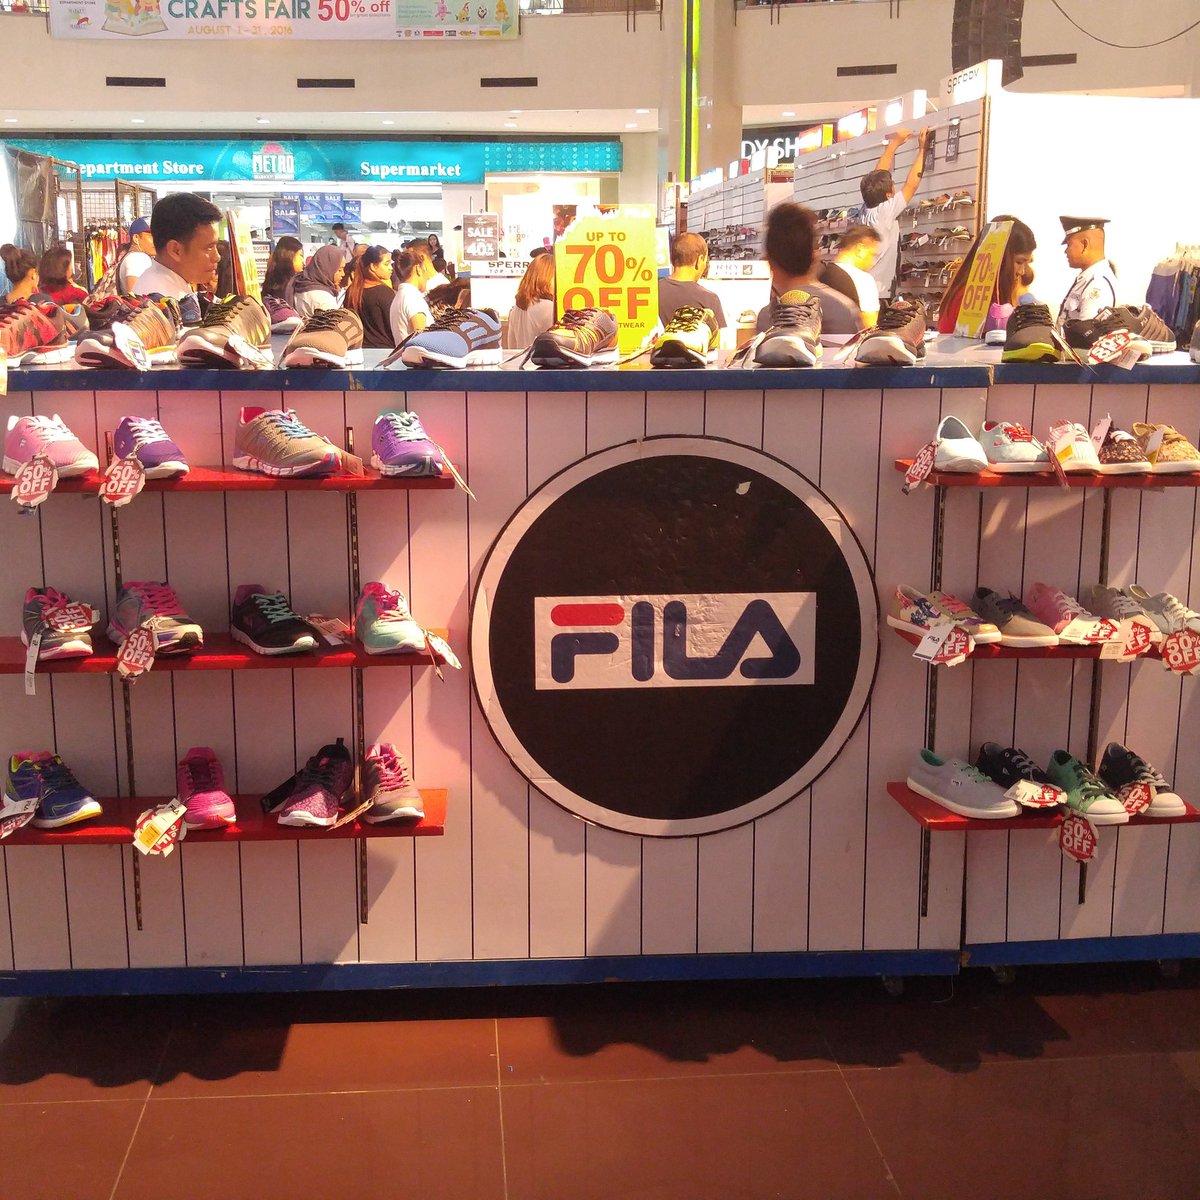 Market! on "Fila is of Drop by the Activity Center and check them out until Aug 28! #AyaMallsMarketMarket https://t.co/I0tVIHQJVV" / Twitter